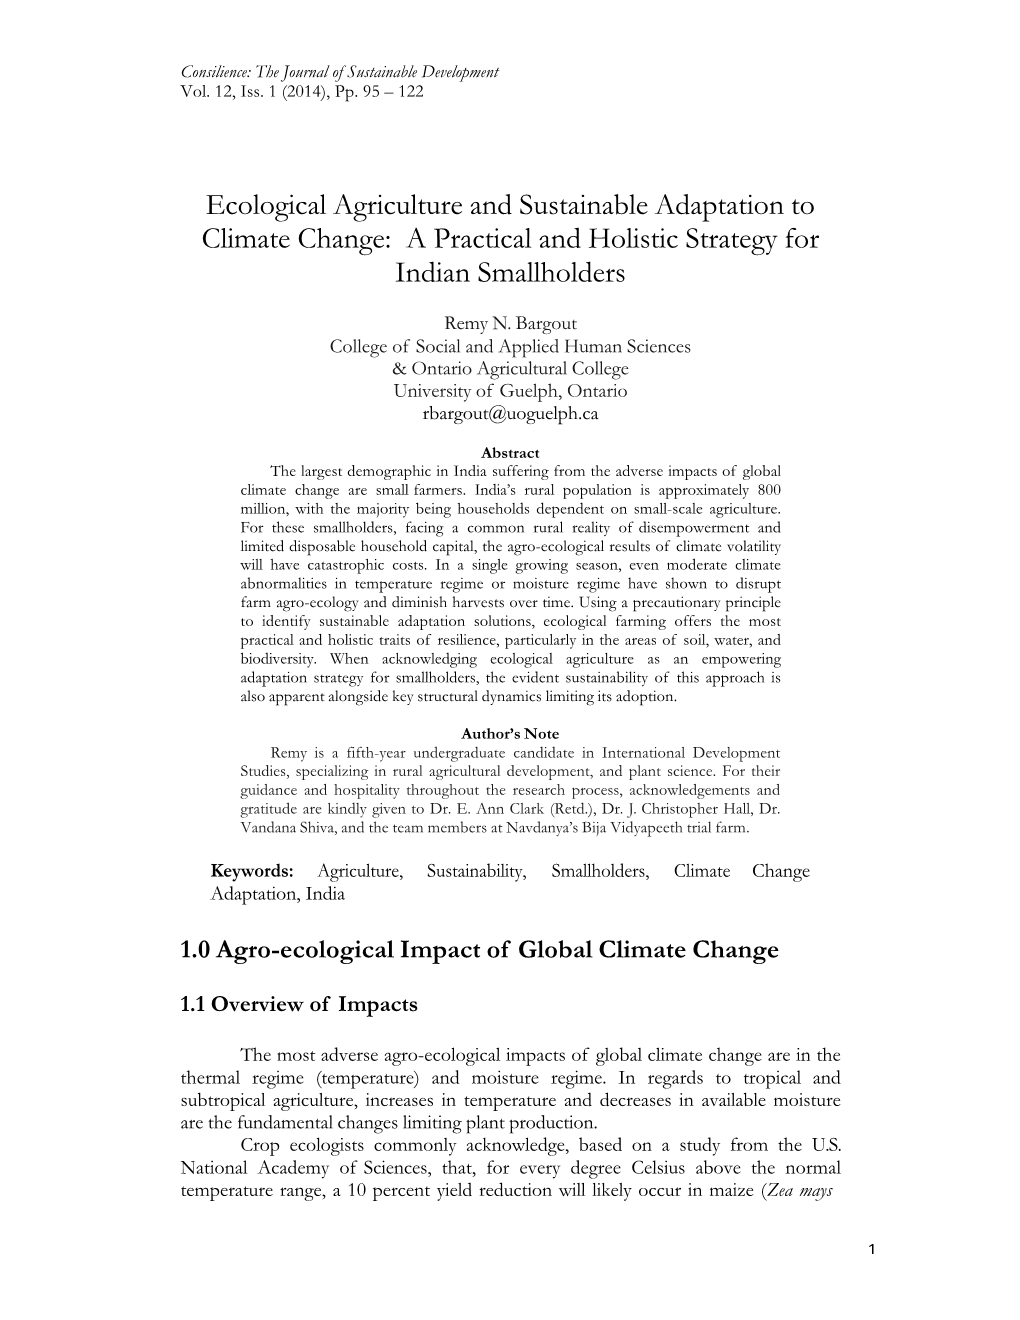 Ecological Agriculture and Sustainable Adaptation to Climate Change: a Practical and Holistic Strategy for Indian Smallholders